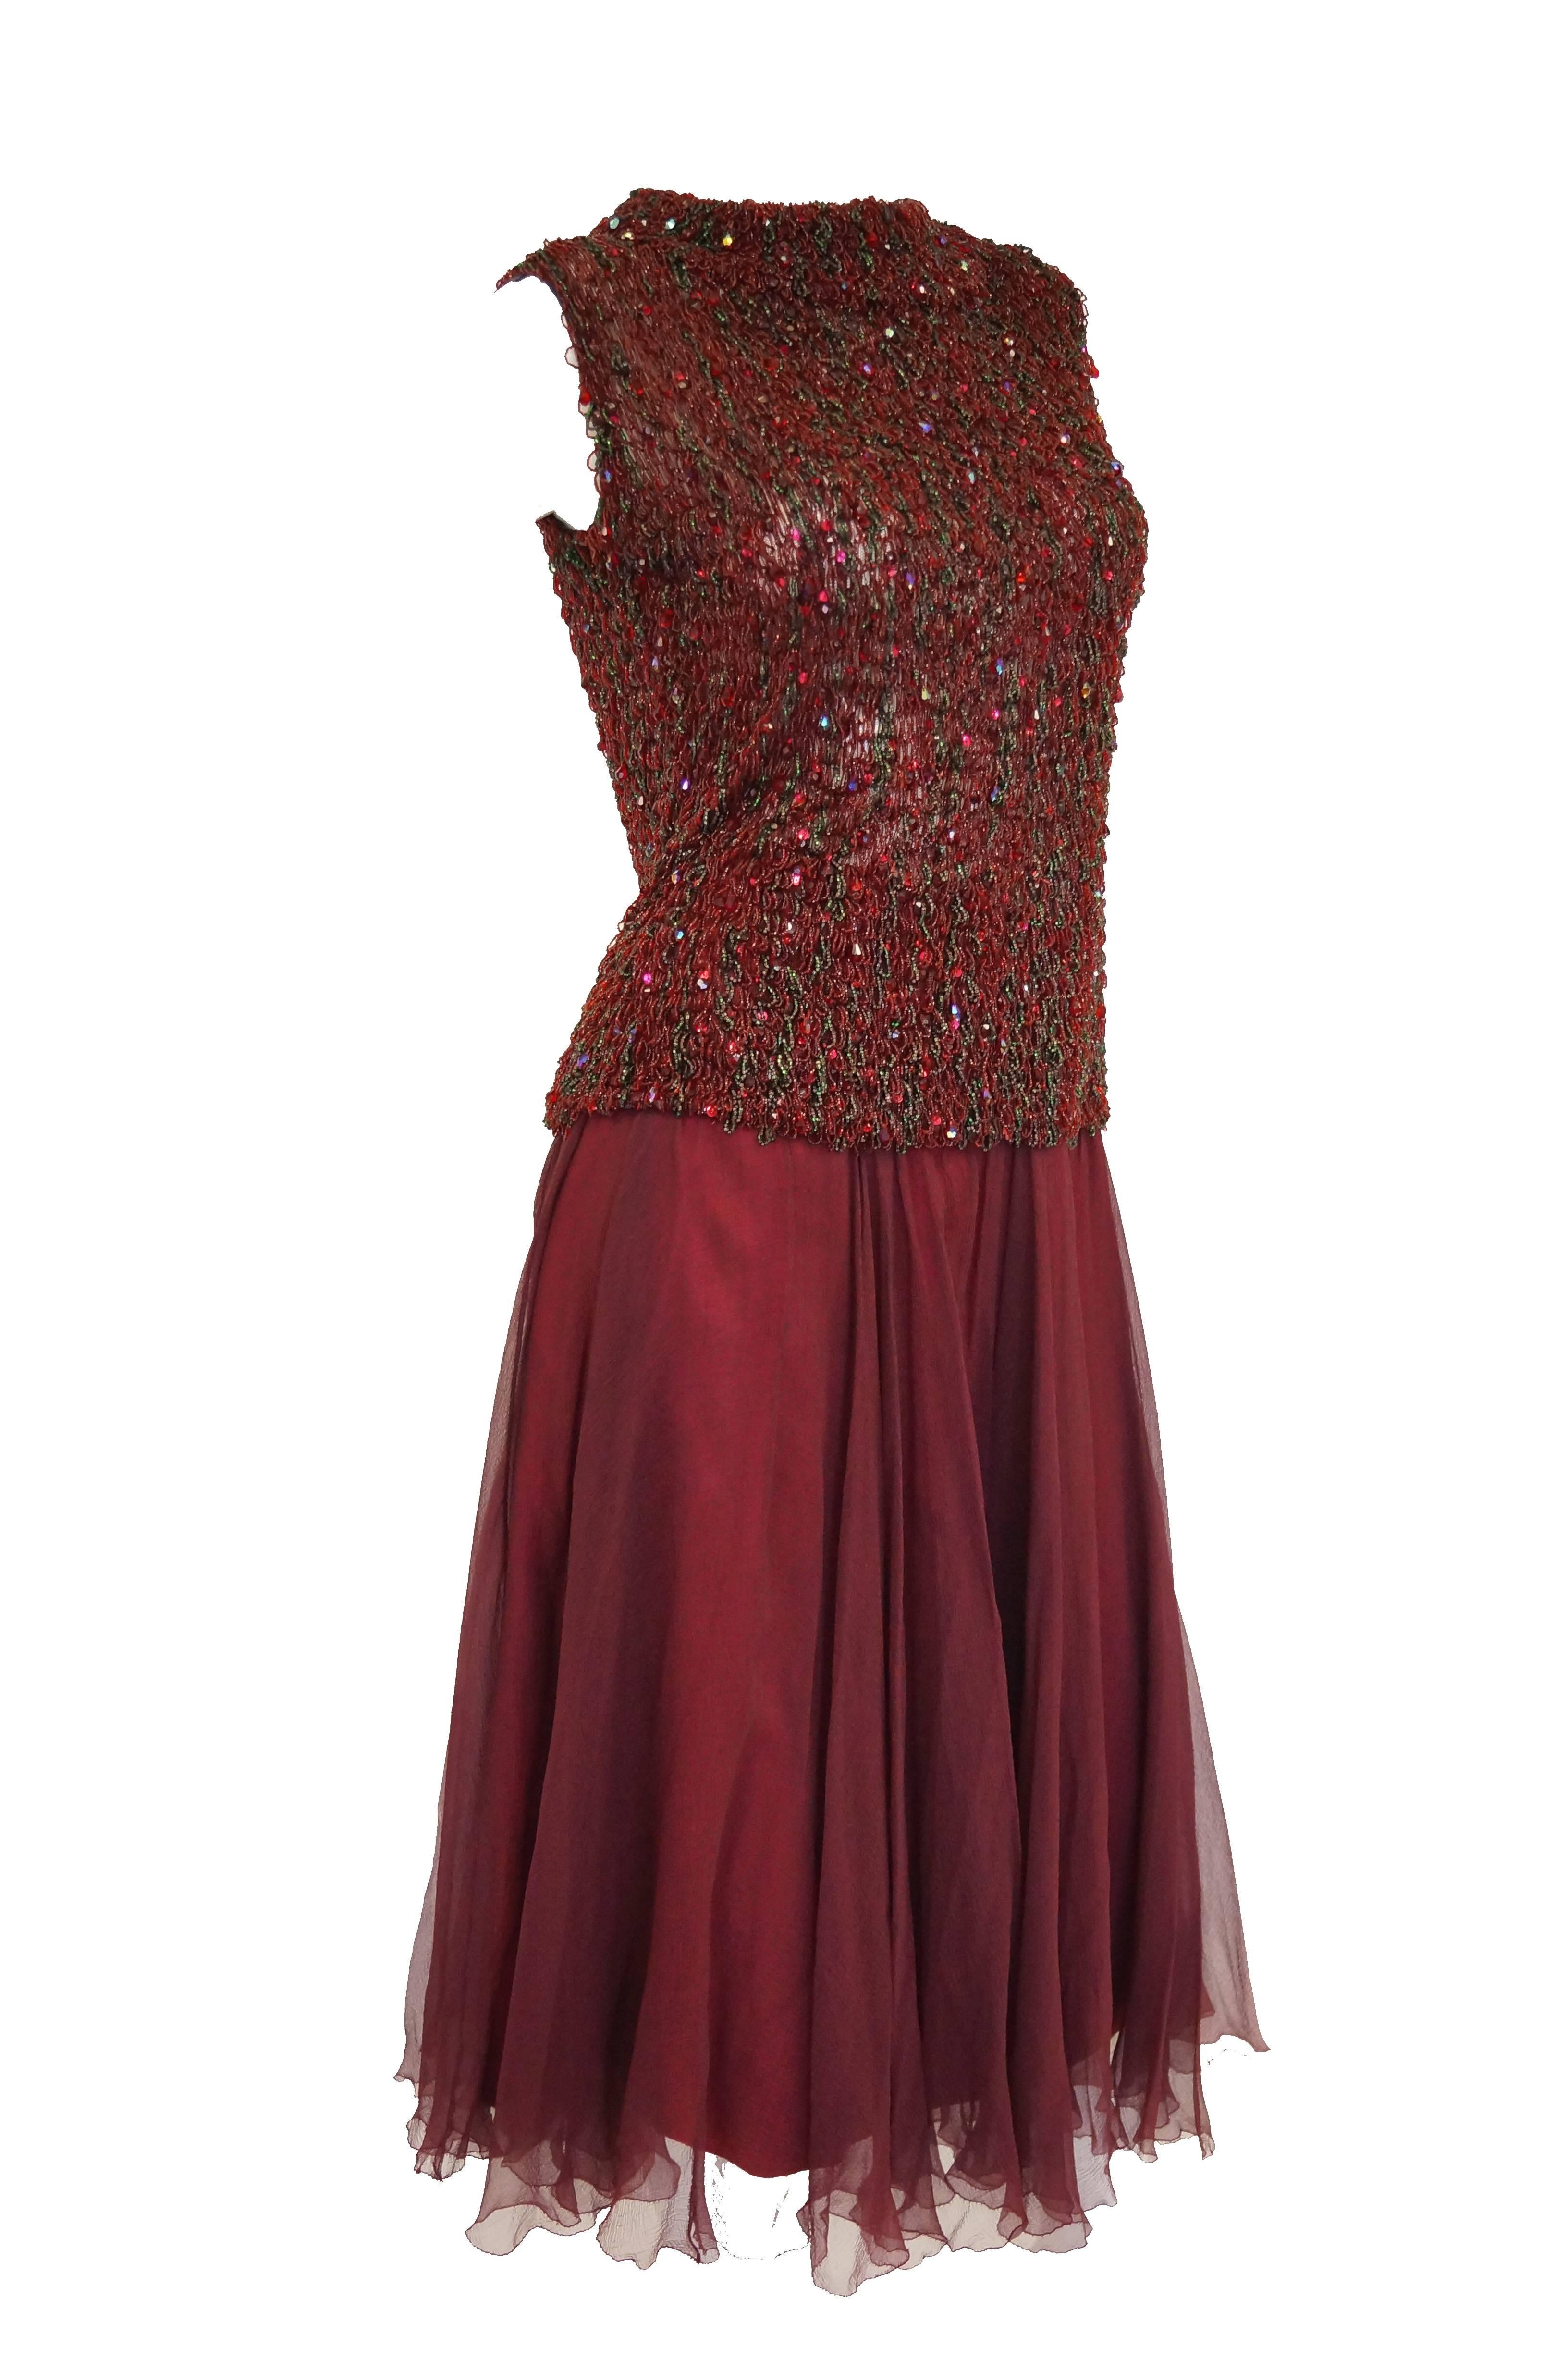 Yves Saint Laurent Couture Evening Dress Owned by Claudette Colbert, 1963  For Sale 3